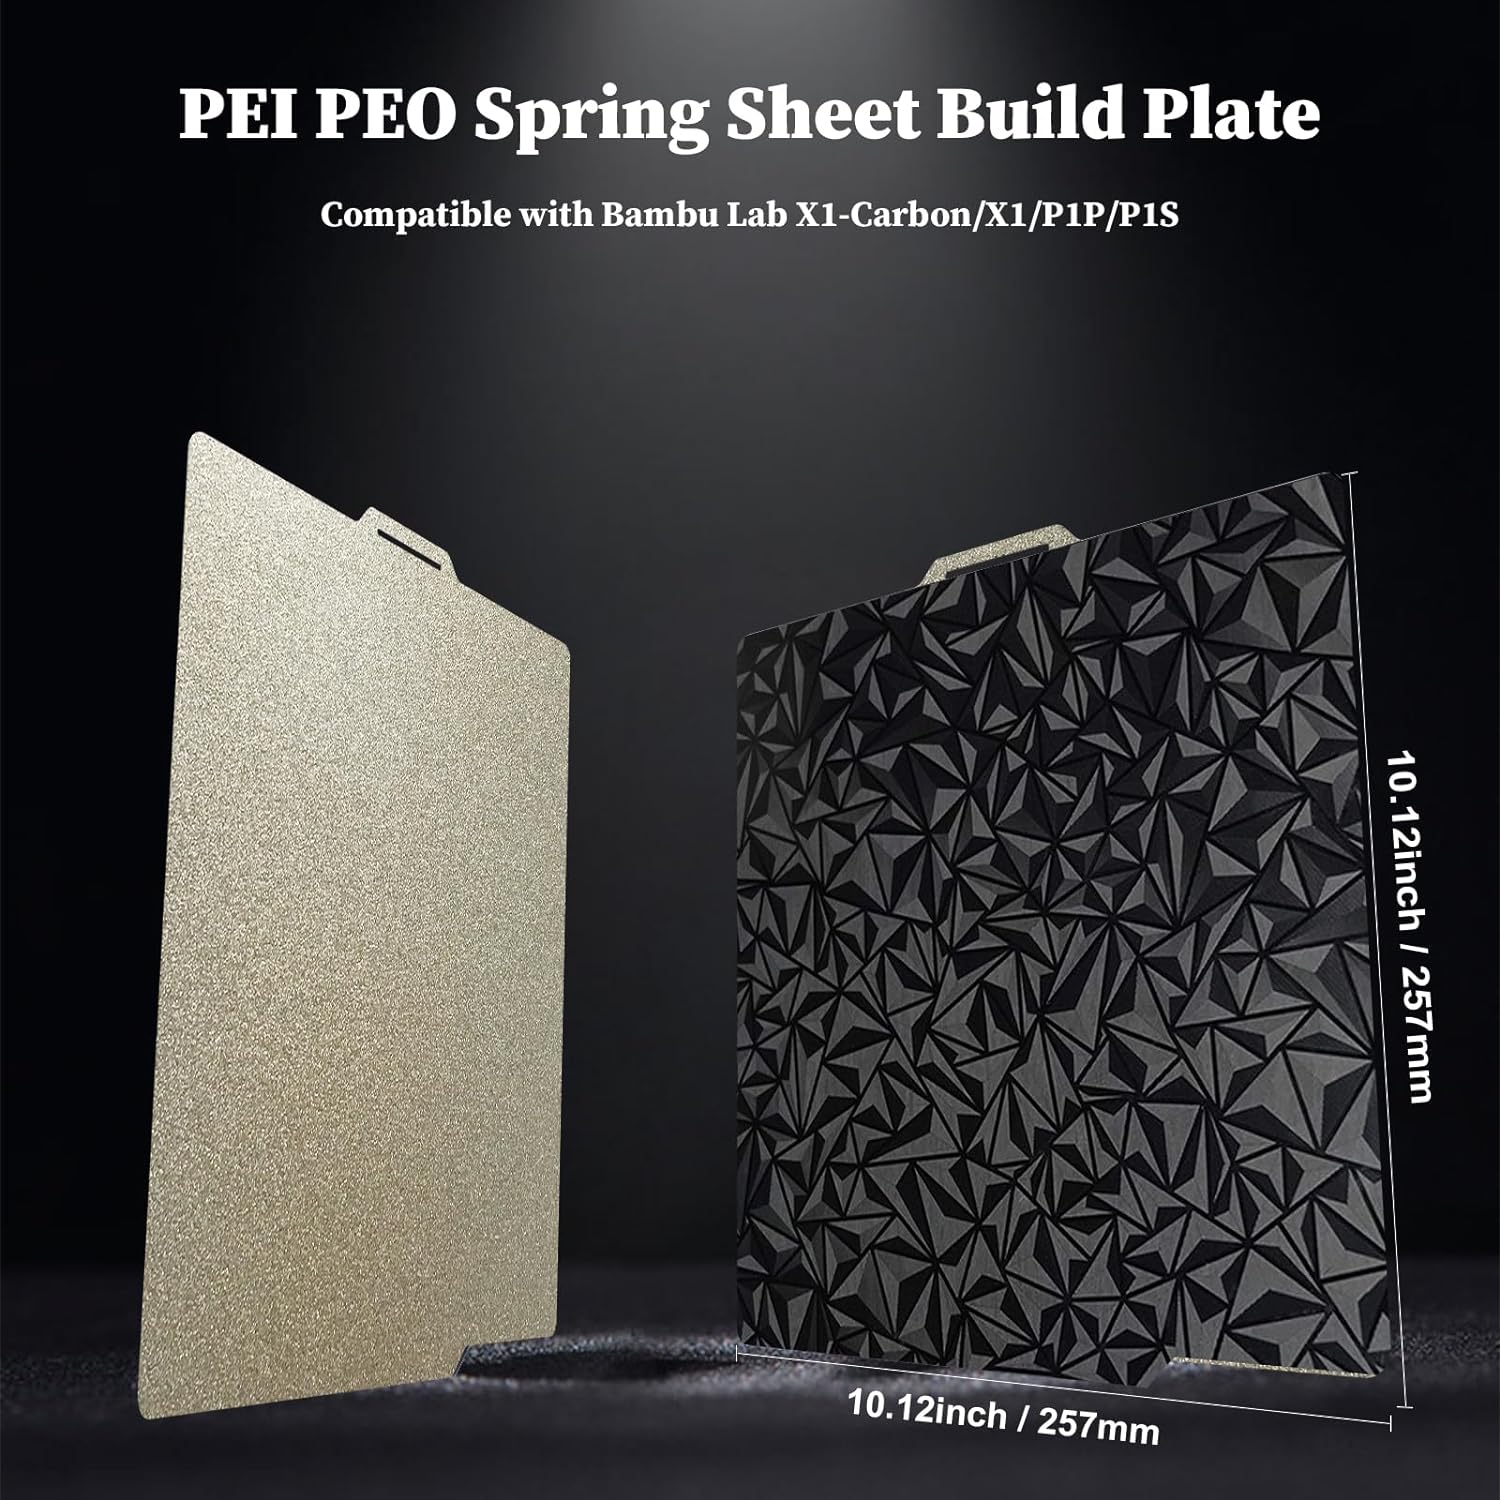 Prstudy 3D Printer PEO PEI Spring Build Plate Sheet for Bambu Lab X1/X1C/P1S/P1P 3D Printer 257mmx257mm Spring Steel Plate Double Sided Flexible Magnetic Platform Bed